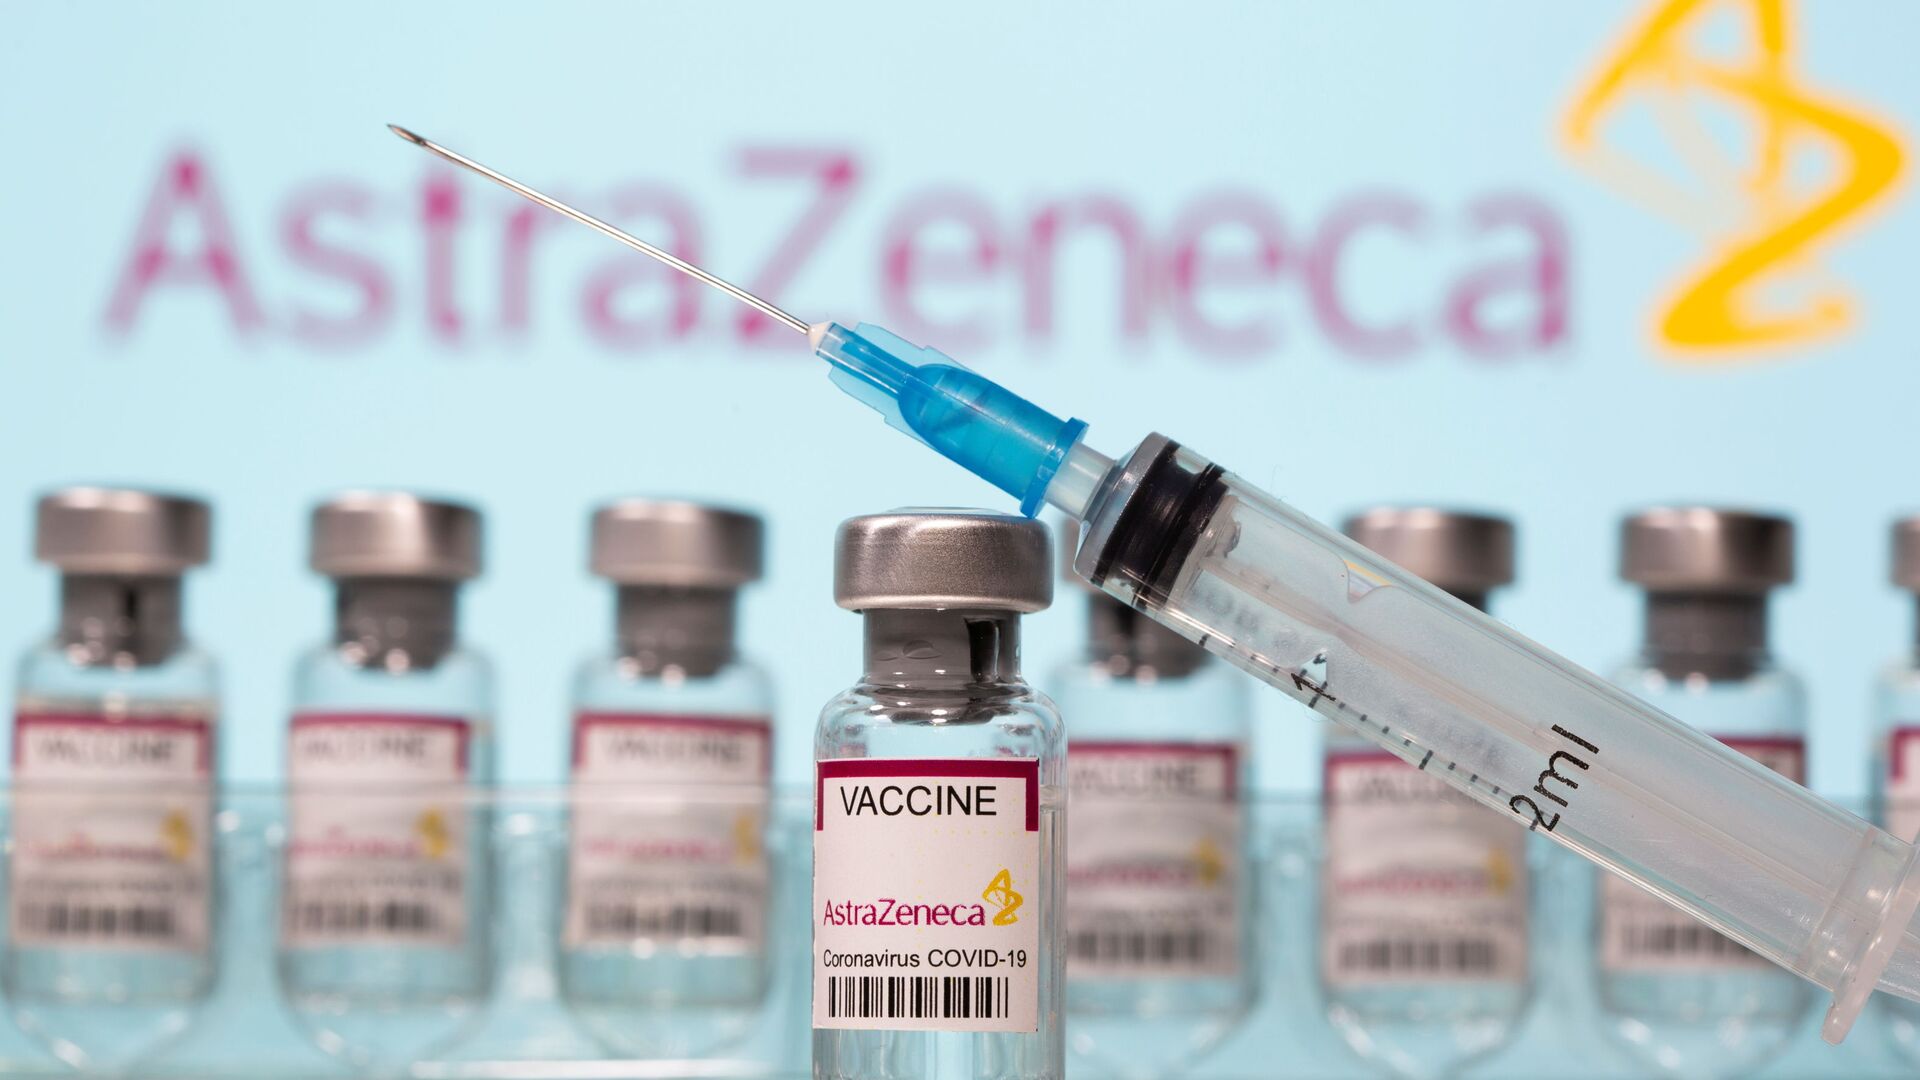 Vials labelled AstraZeneca COVID-19 Coronavirus Vaccine and a syringe are seen in front of a displayed AstraZeneca logo in this illustration taken March 10, 2021. REUTERS/Dado Ruvic/Illustration - Sputnik International, 1920, 30.03.2021